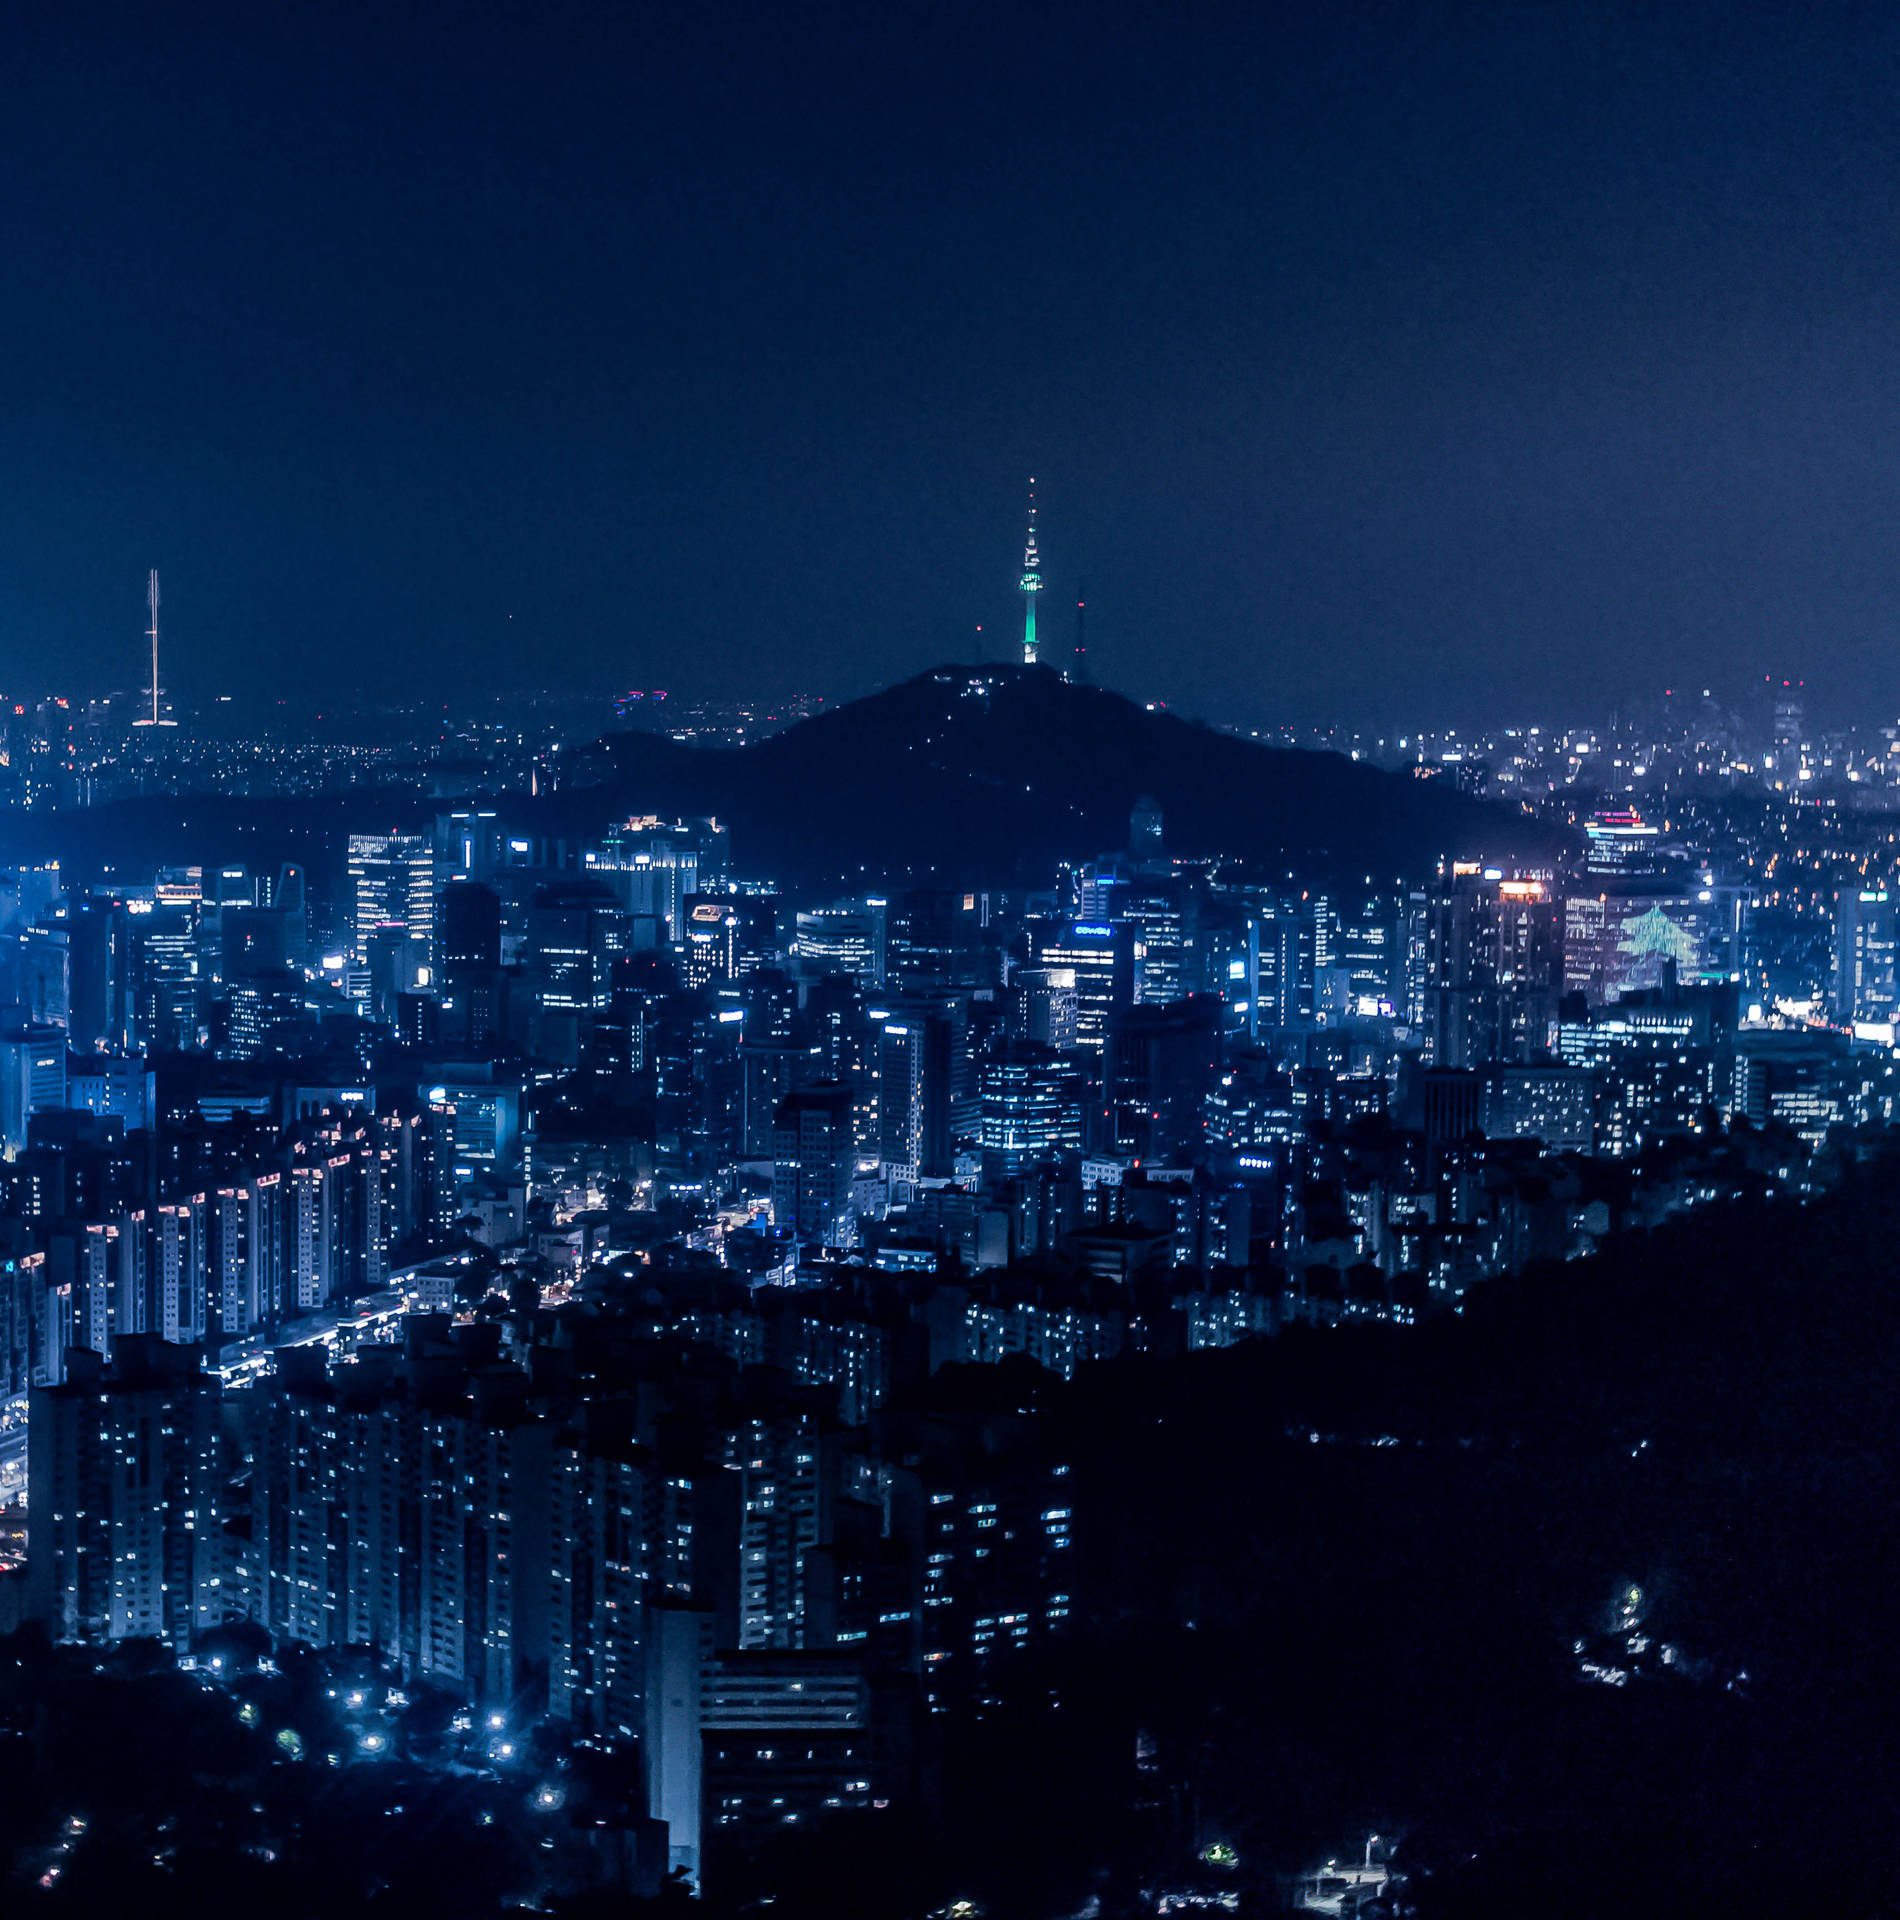 Seoul Lit Up in the Night Sky Wallpaper